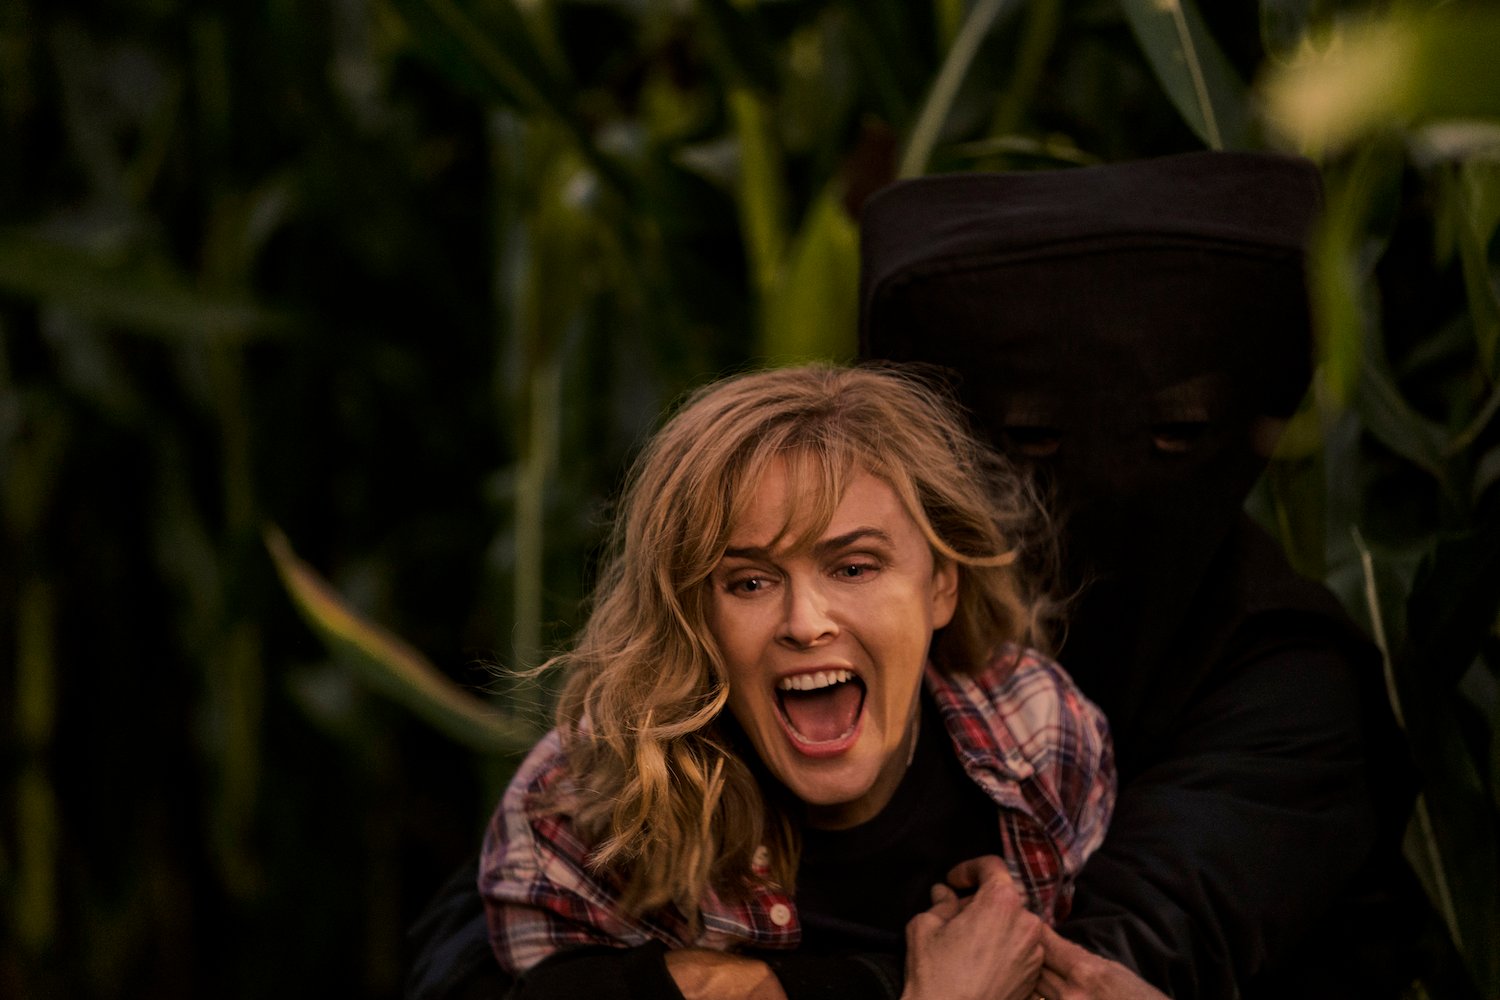 Emily Deschanel, screaming in a corn field, in a production still. Here's the 'Devil in Ohio' ending explained.